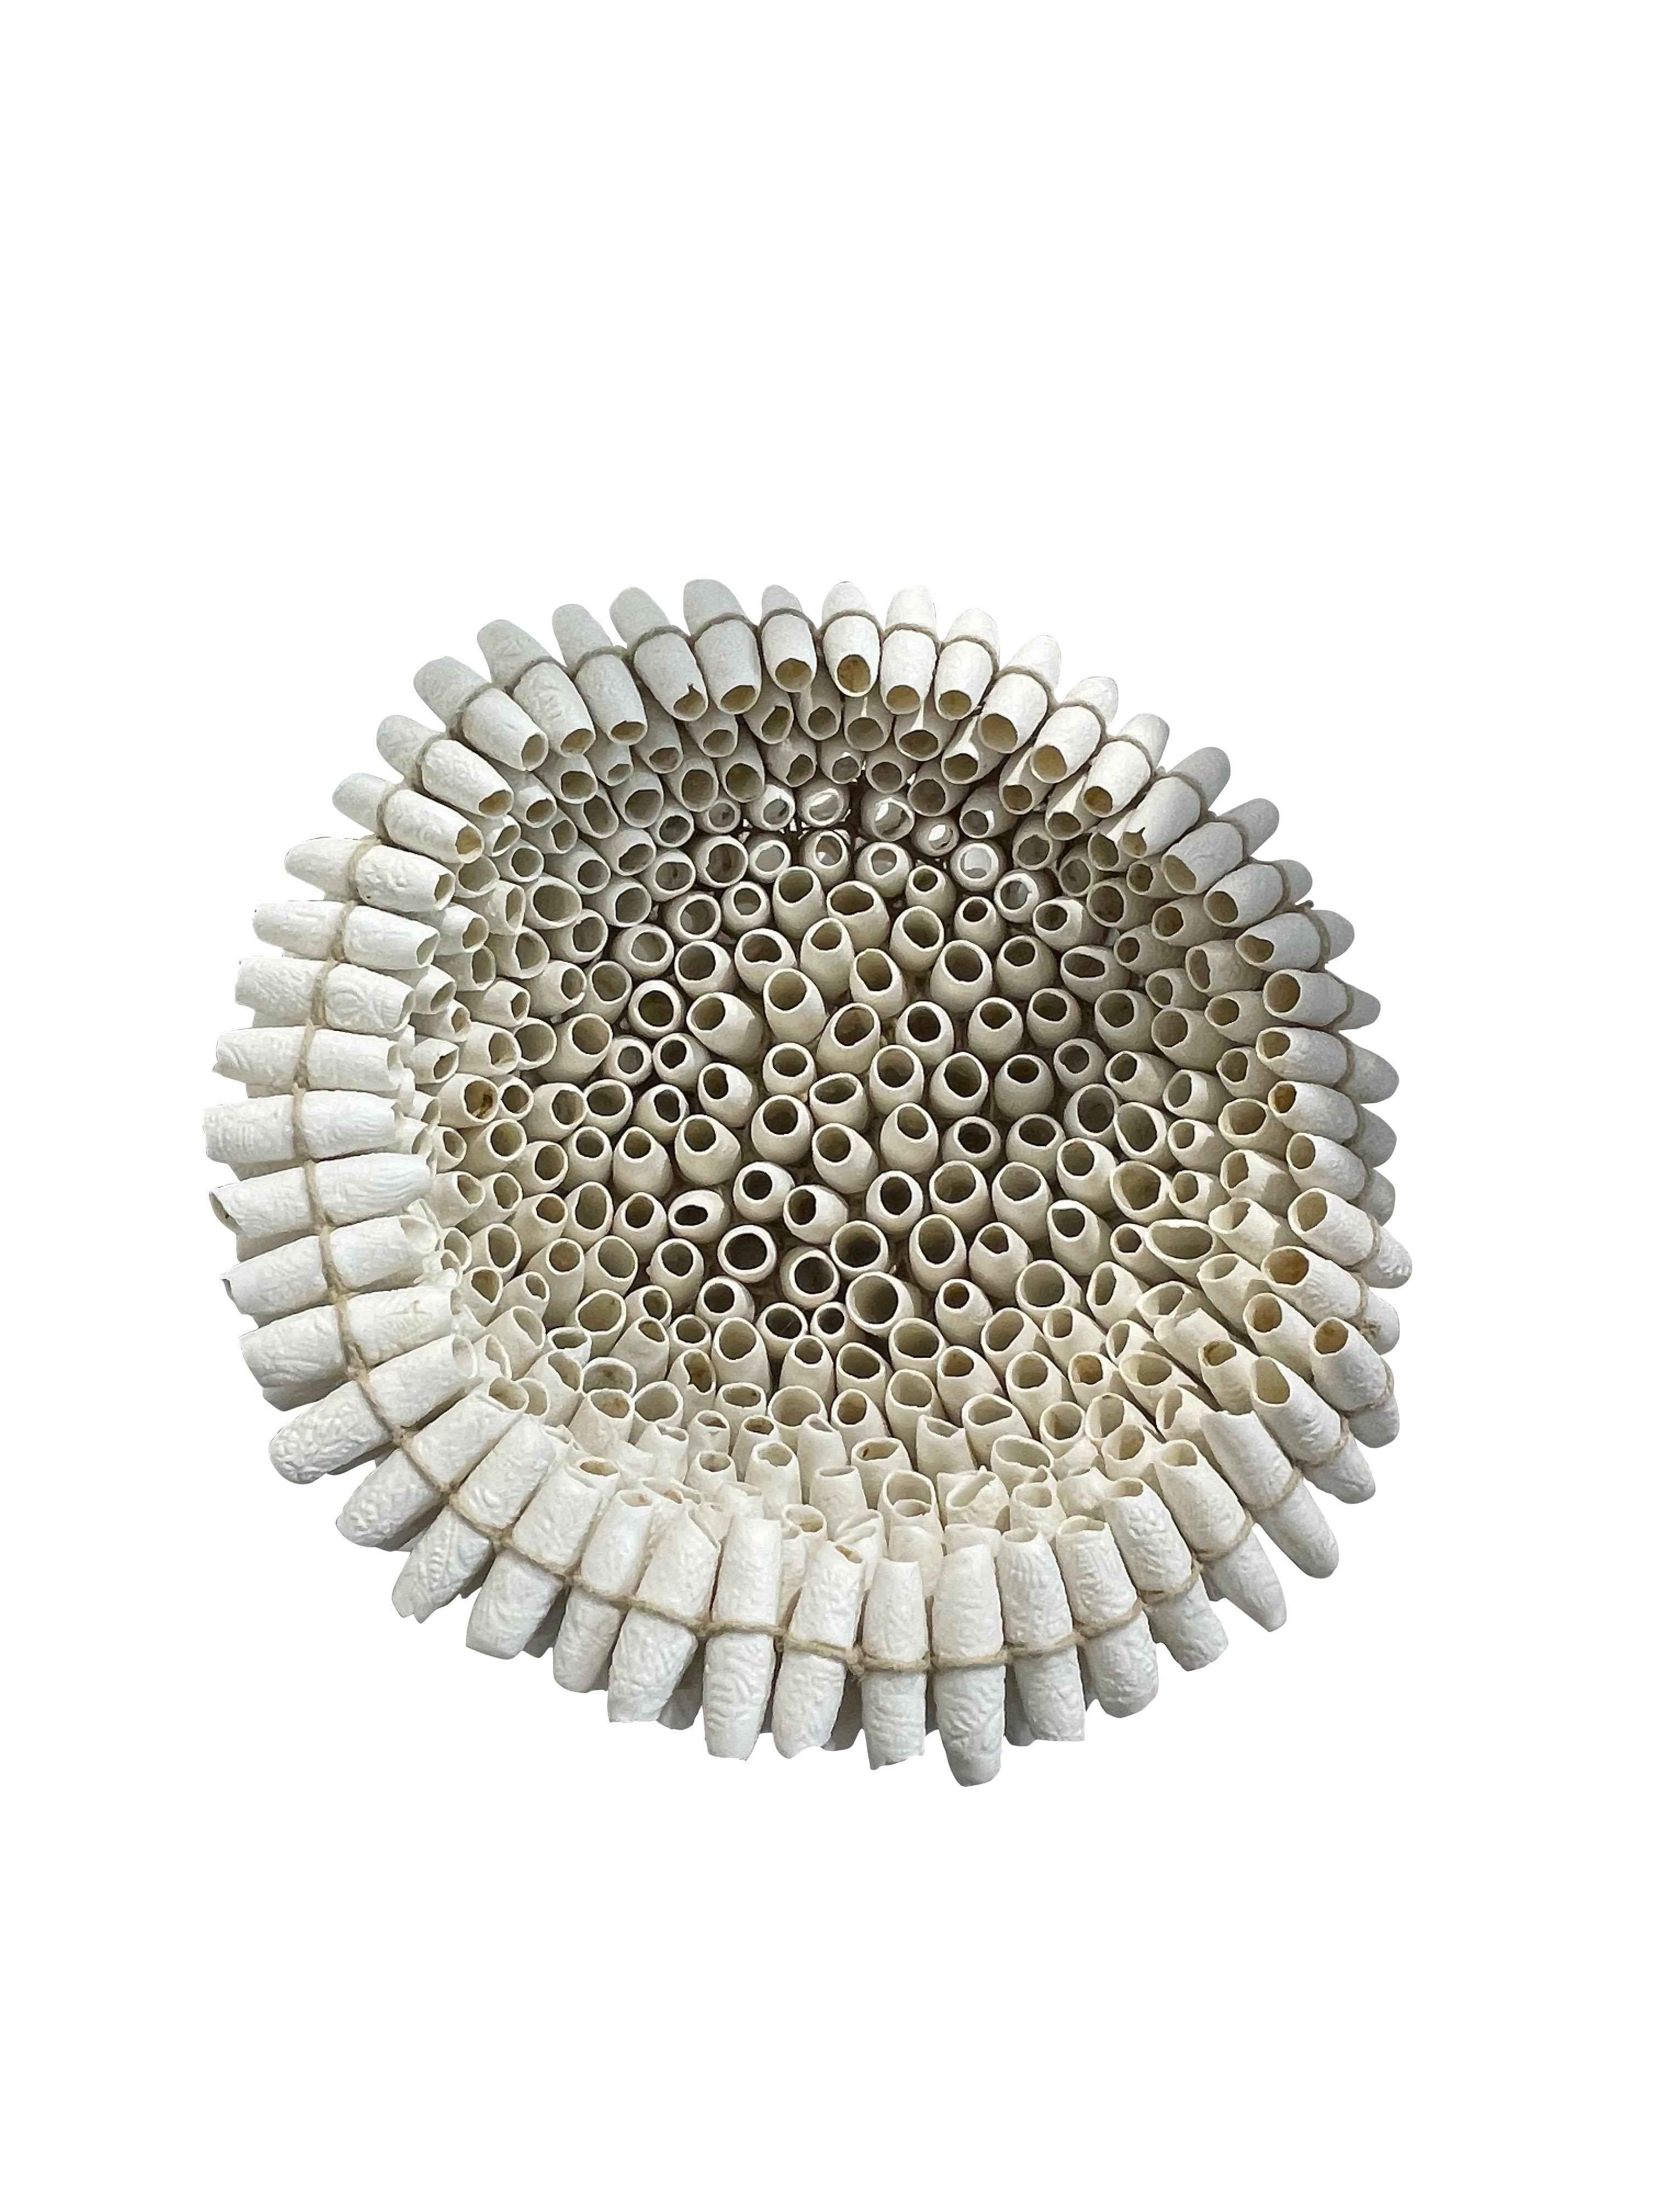 Contemporary French handmade porcelain tubes.
Joined together in the shape of a large bowl.
Unique and very decorative.
